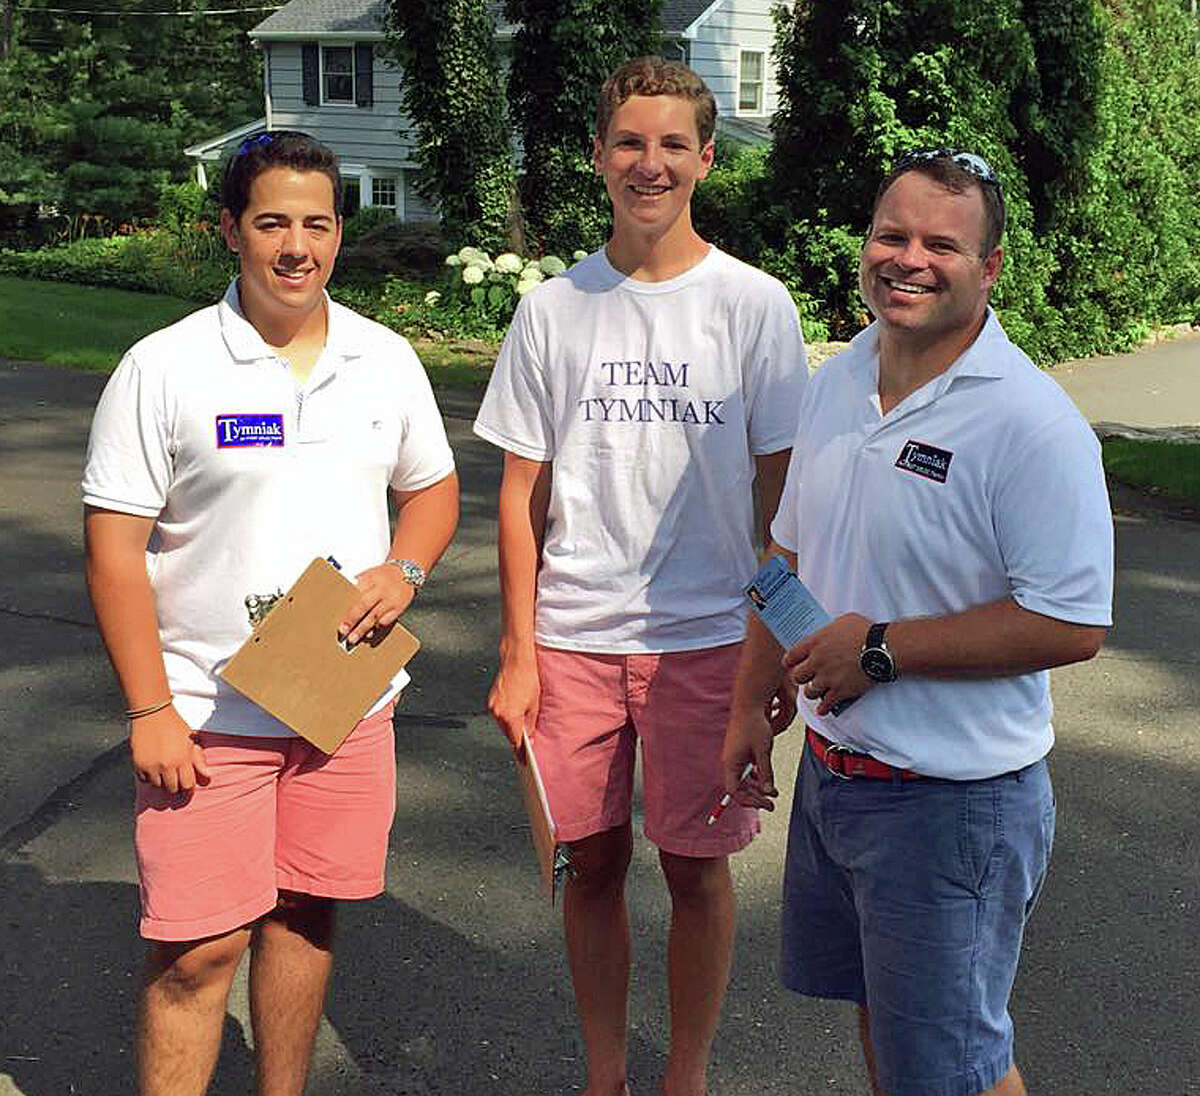 Republican first selectman candidate Chris Tymniak, far right, hits the campaign trail with volunteers Jack Elsas, left, and Damian Chessare, right.